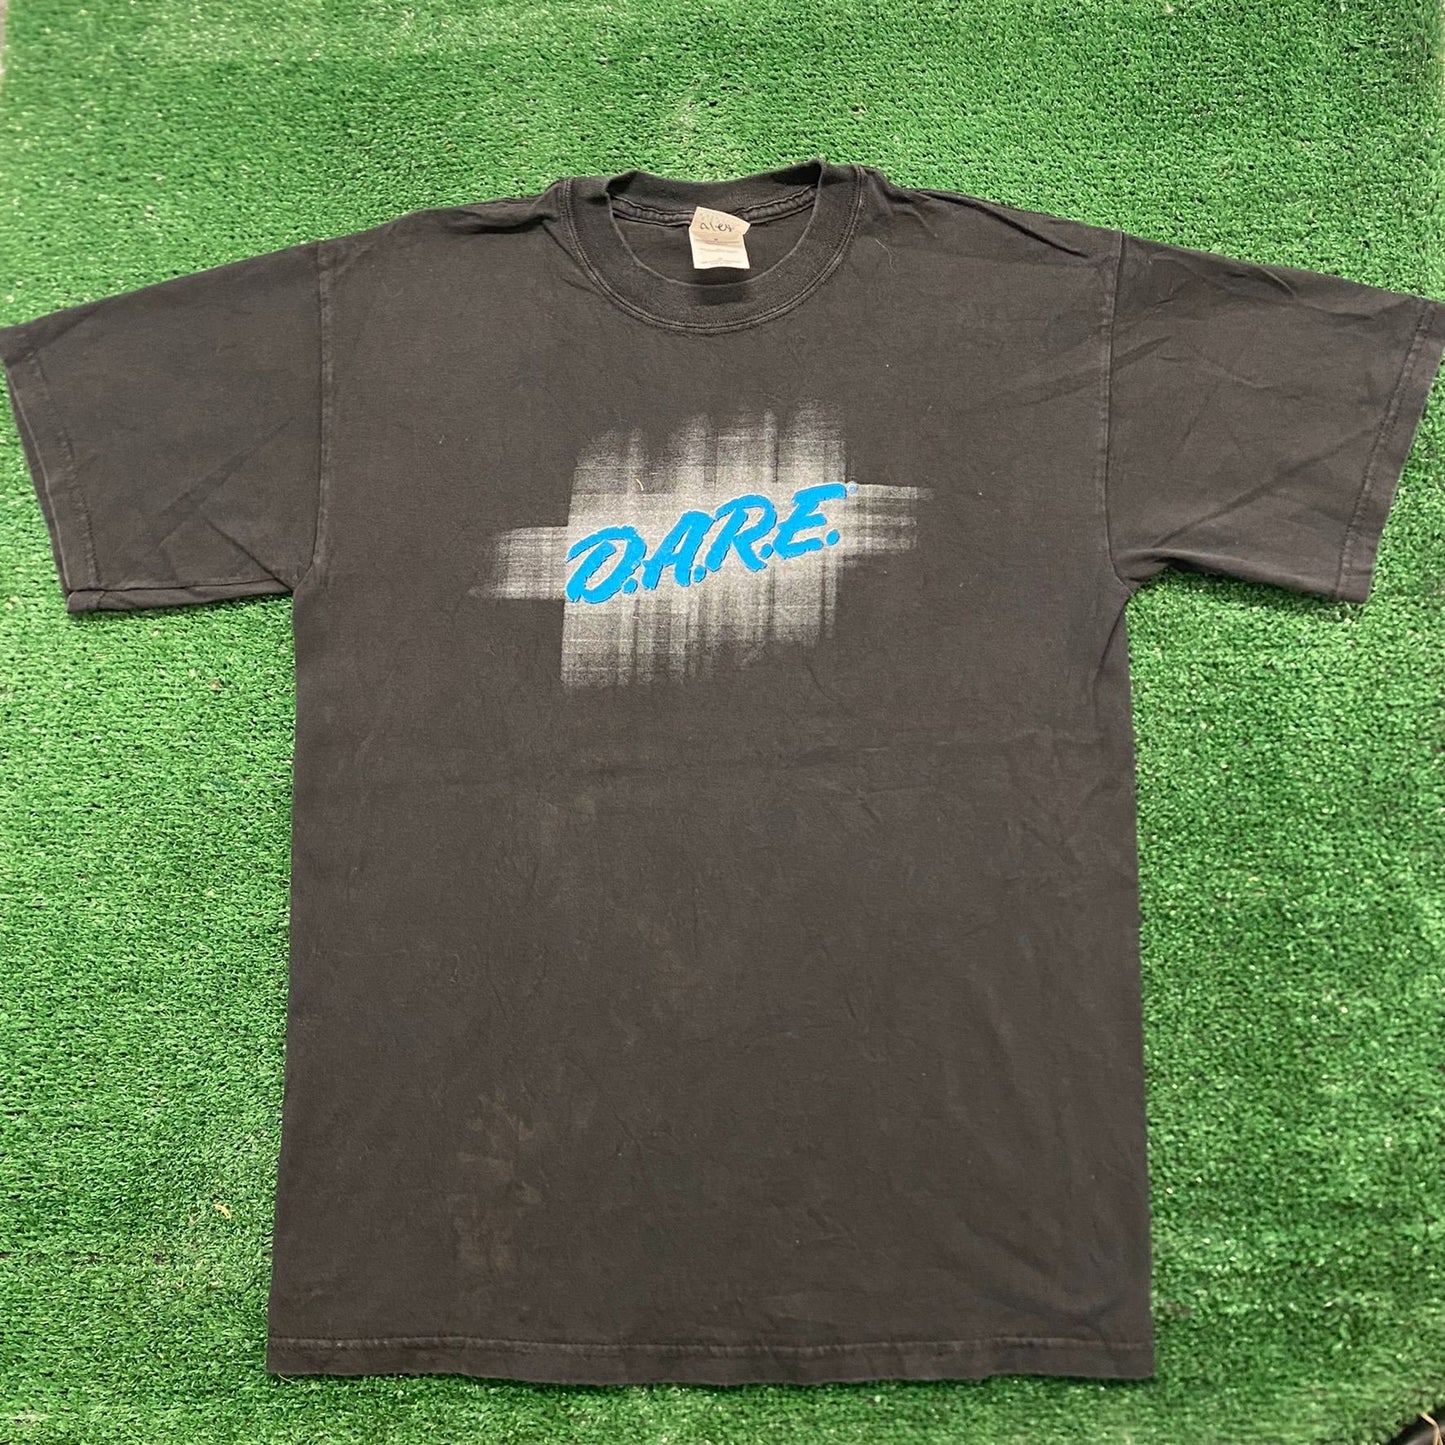 Vintage 90s DARE Spell Out Logo Essential Drugs T-Shirt